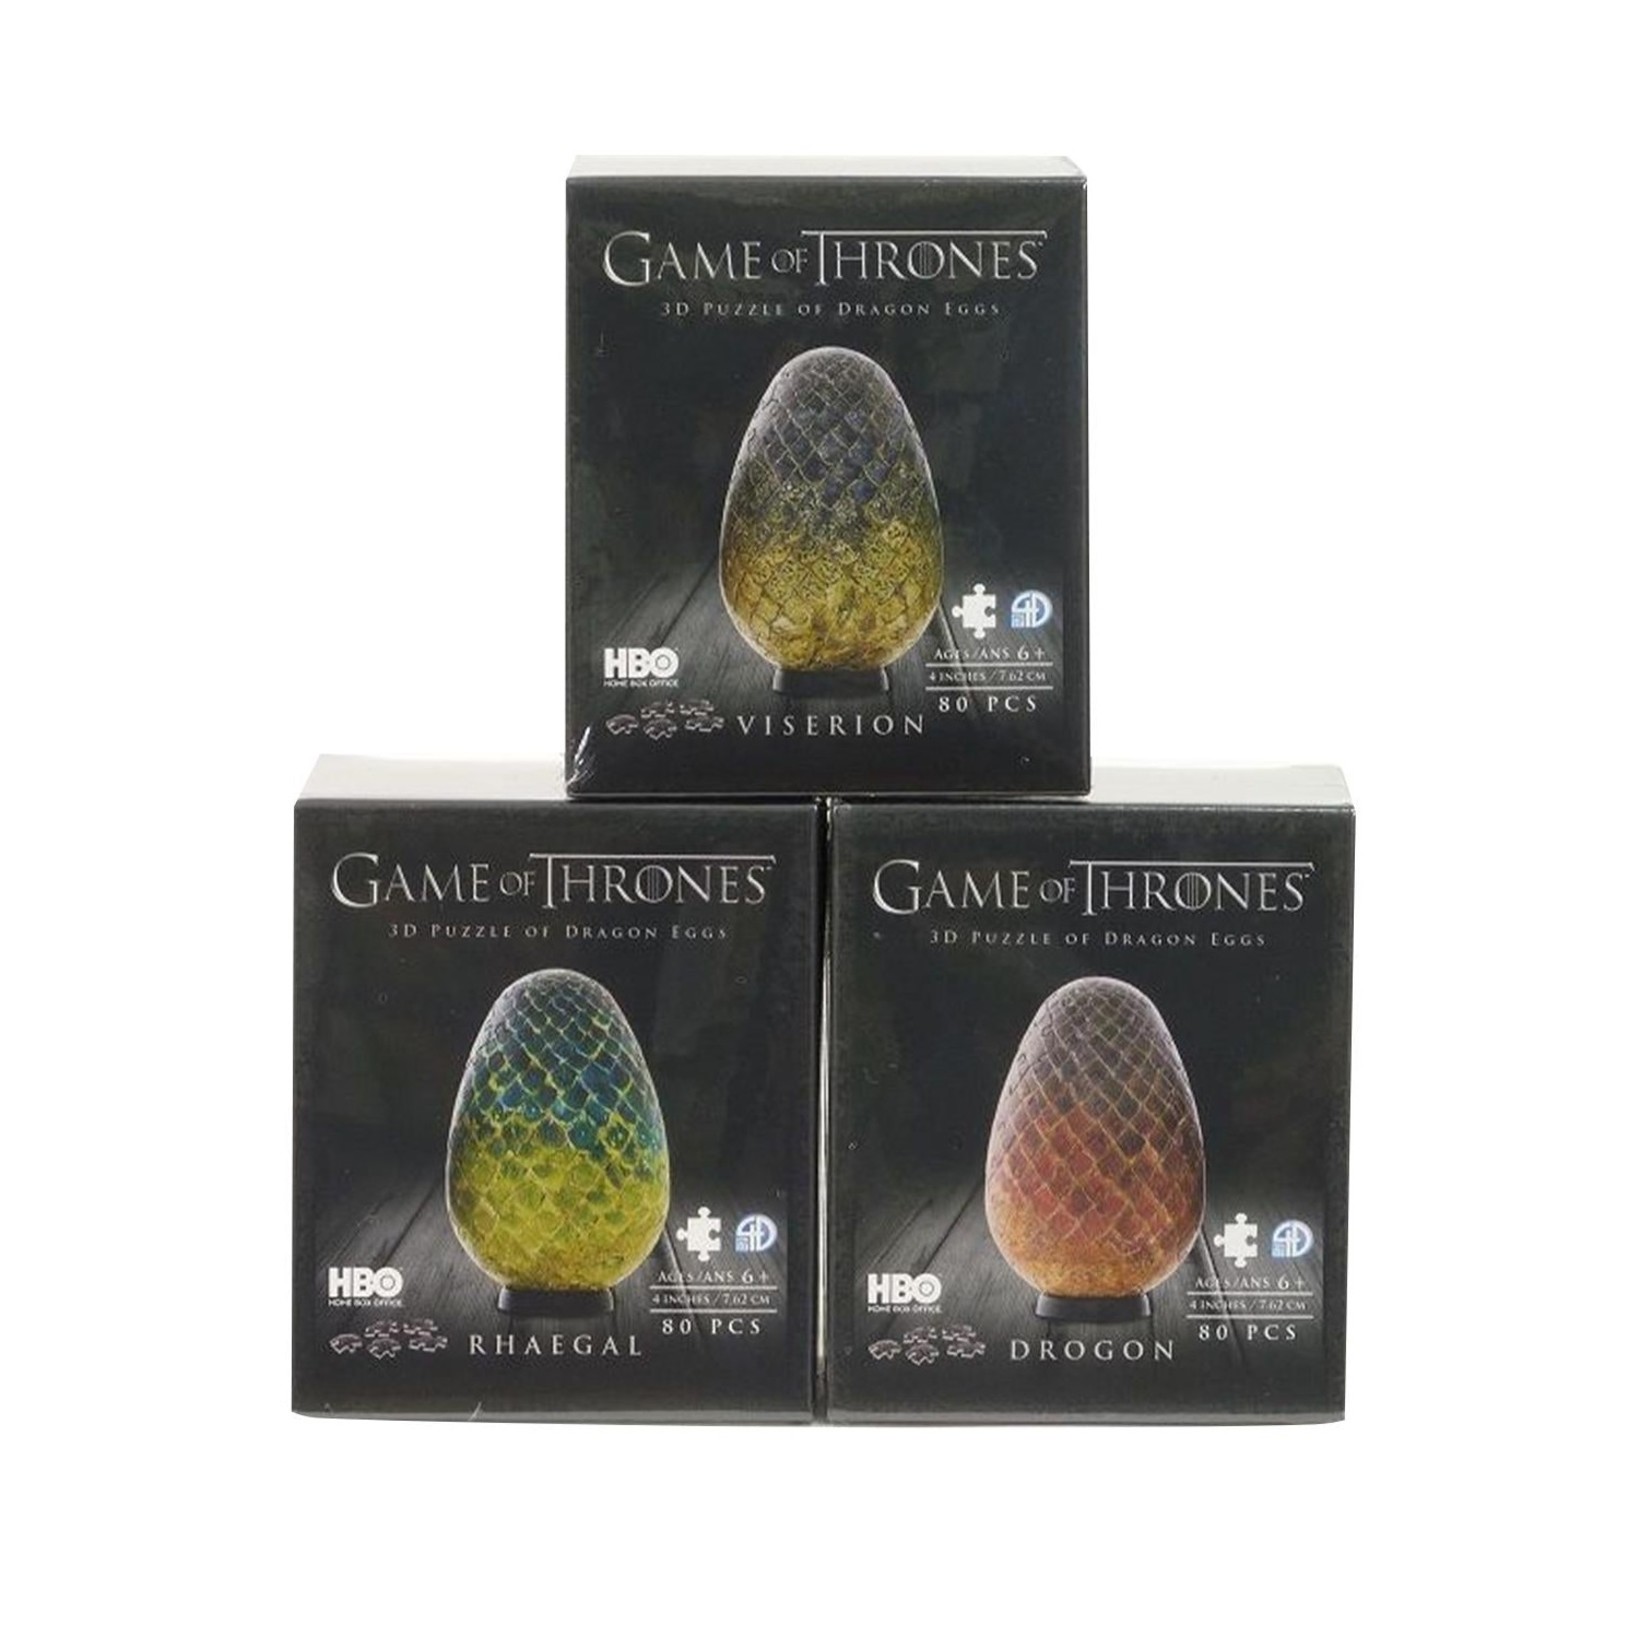 Hbo Home Box Office PZ3D80 - Game of thrones - Dragon eggs